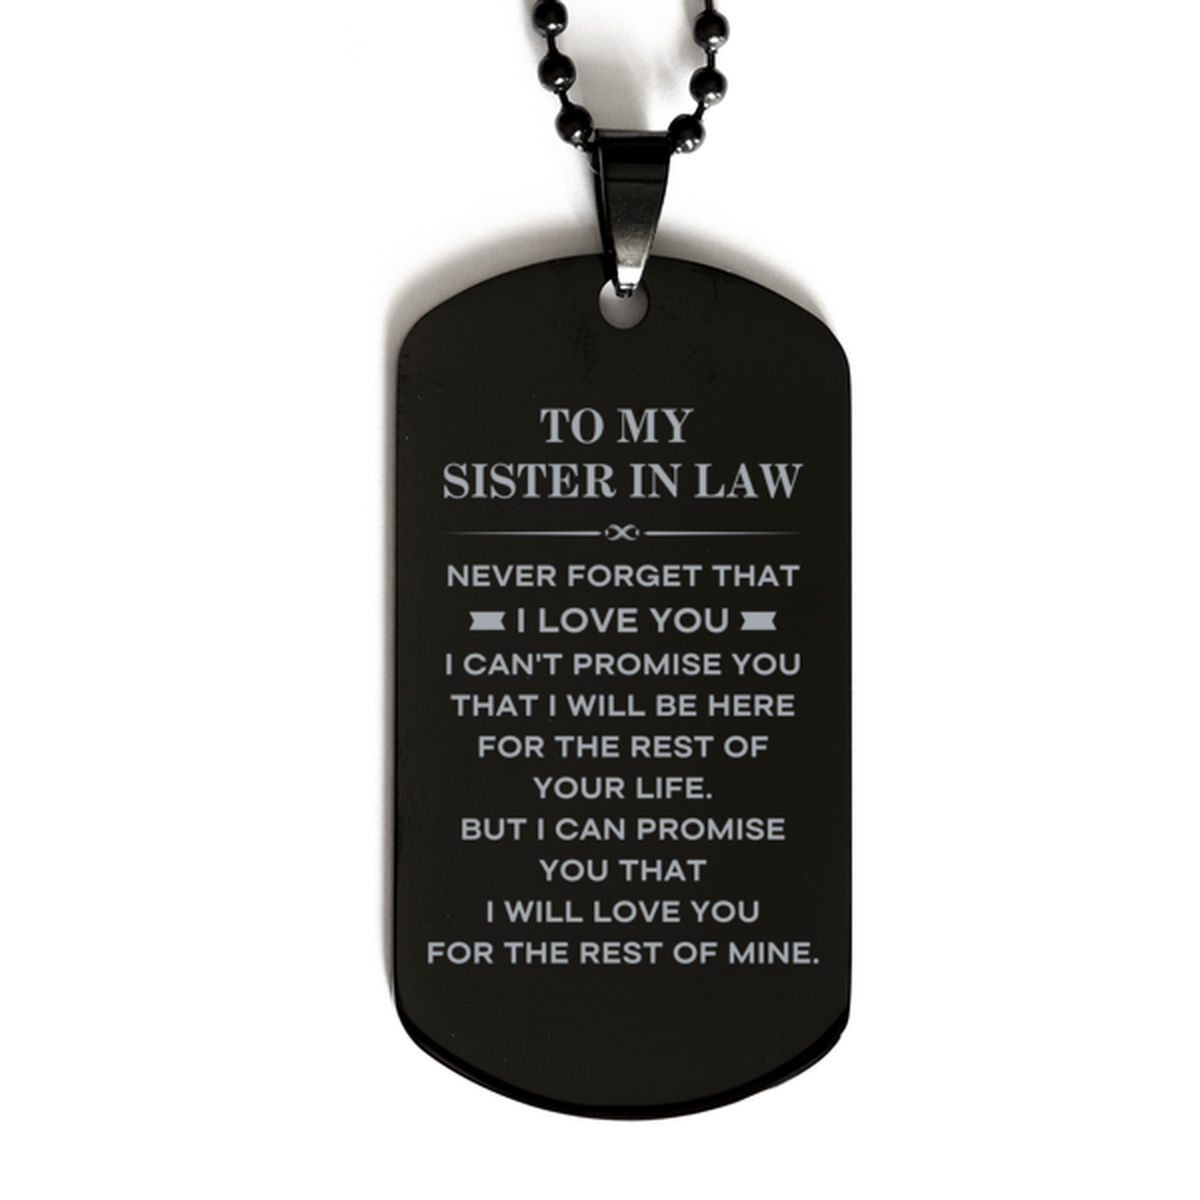 To My Sister In Law Gifts, I will love you for the rest of mine, Love Sister In Law Dog Tag Necklace, Birthday Christmas Unique Black Dog Tag For Sister In Law